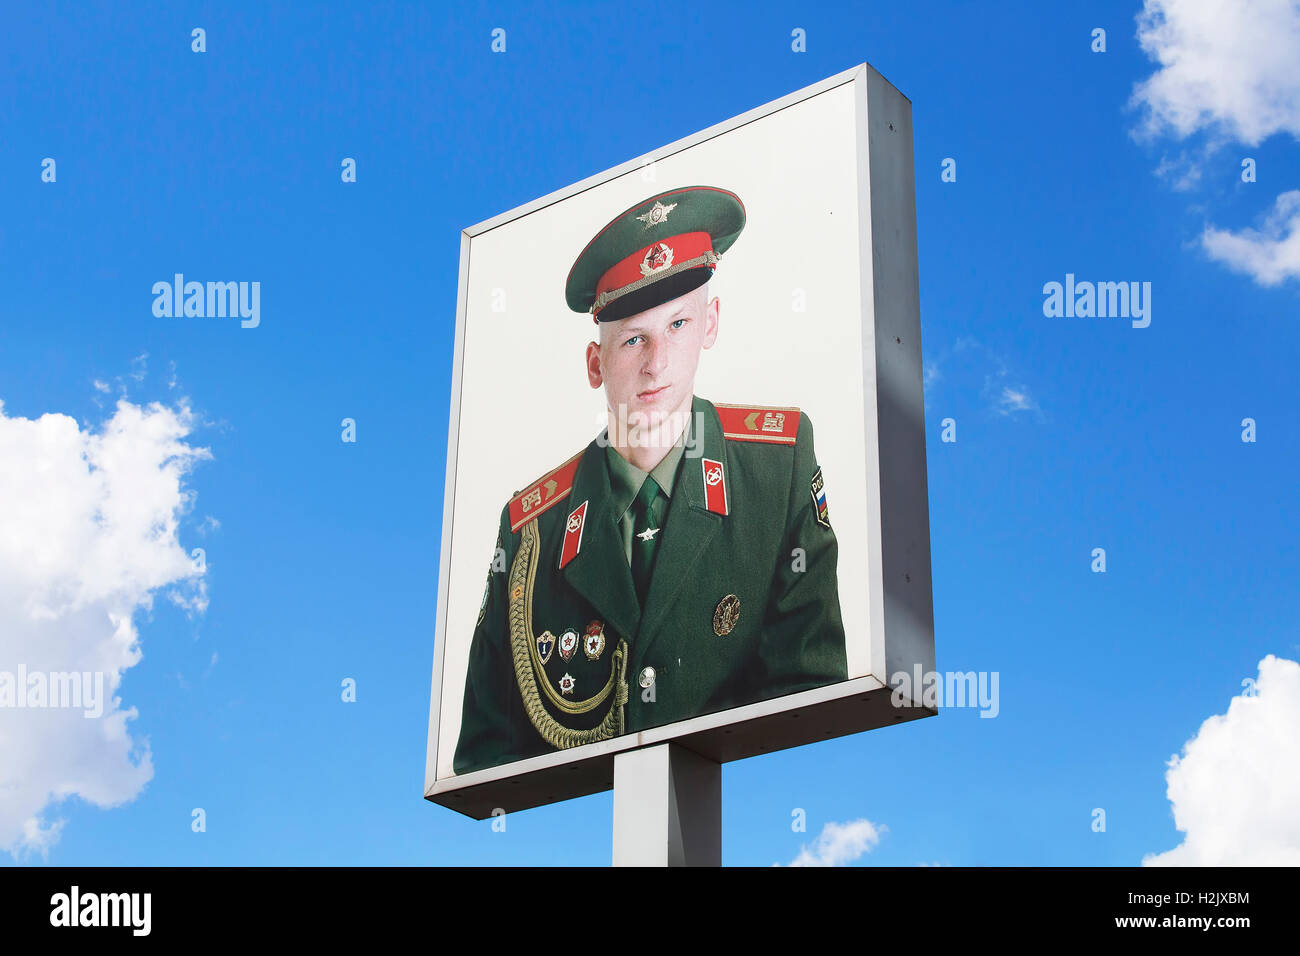 Photograph of soldier placed on sign at Checkpoint Charlie (or "Checkpoint C") given name by the Western Allies to the best-know Stock Photo